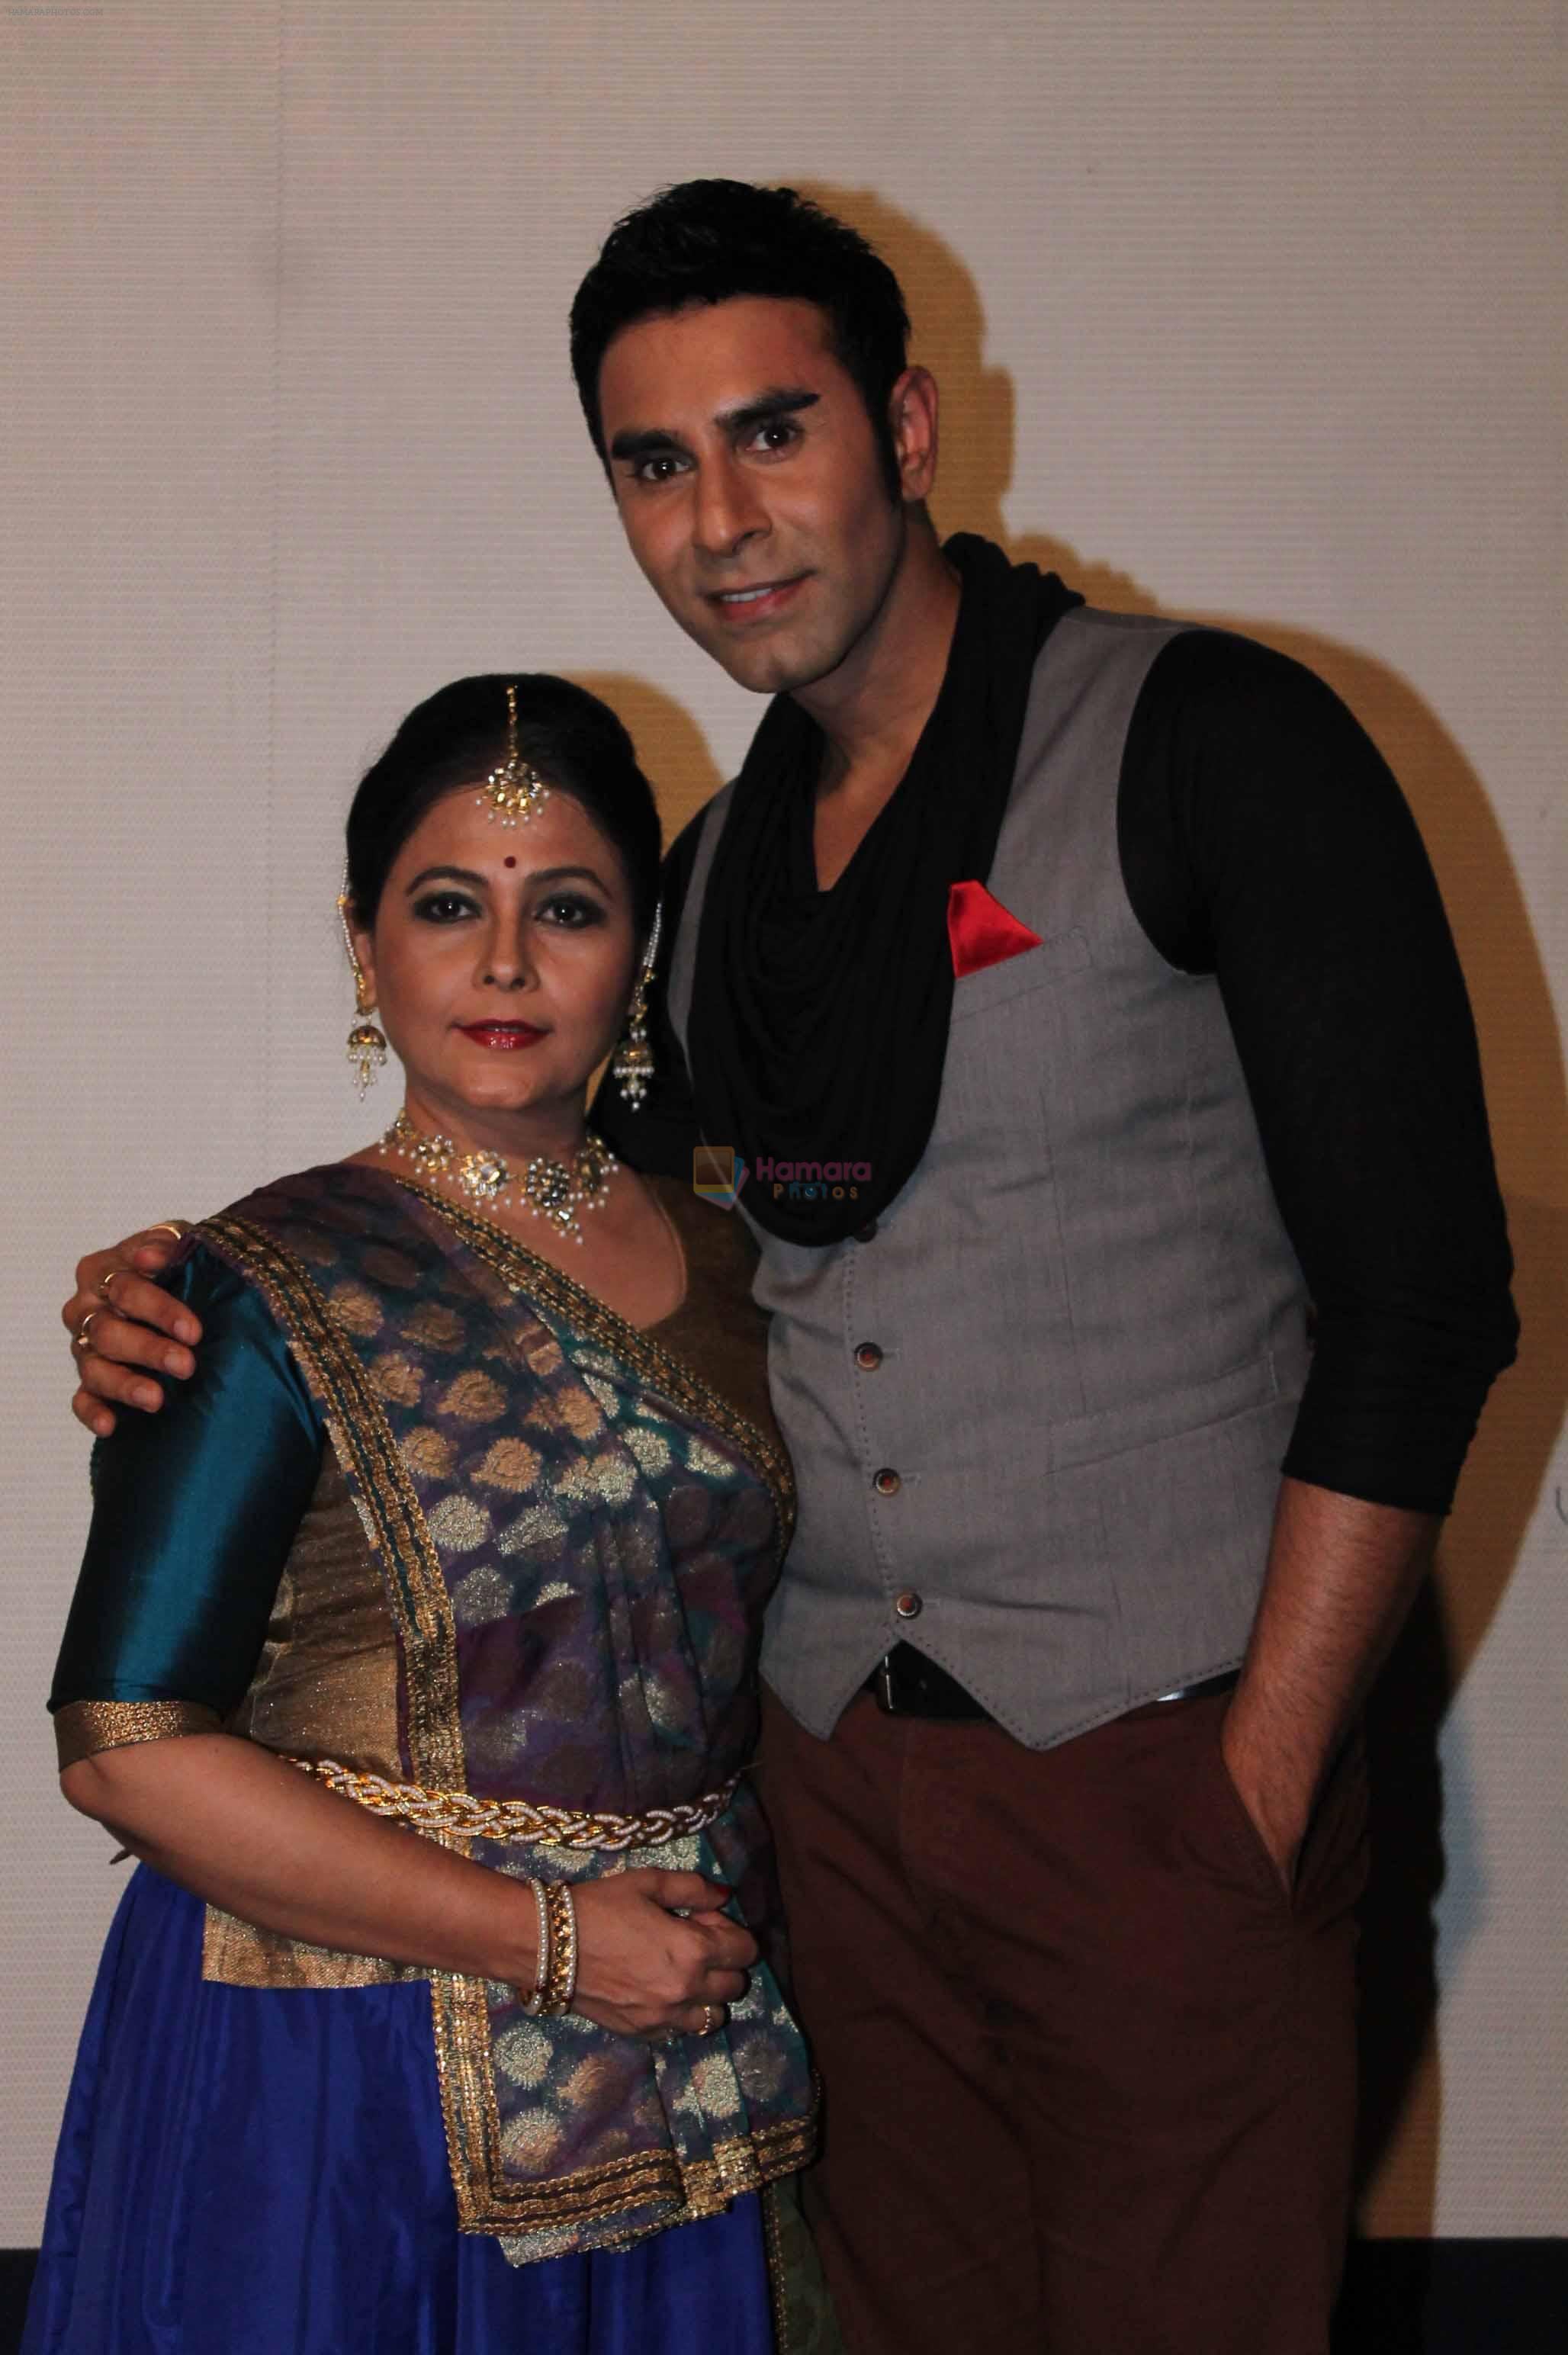 Vijayshree Chaudhary with Sandip Soparrkar at Indo Korean grand musical by Sandip Soparrkar based on 78 AD staged for Valentine's Day on 11th Feb 2015